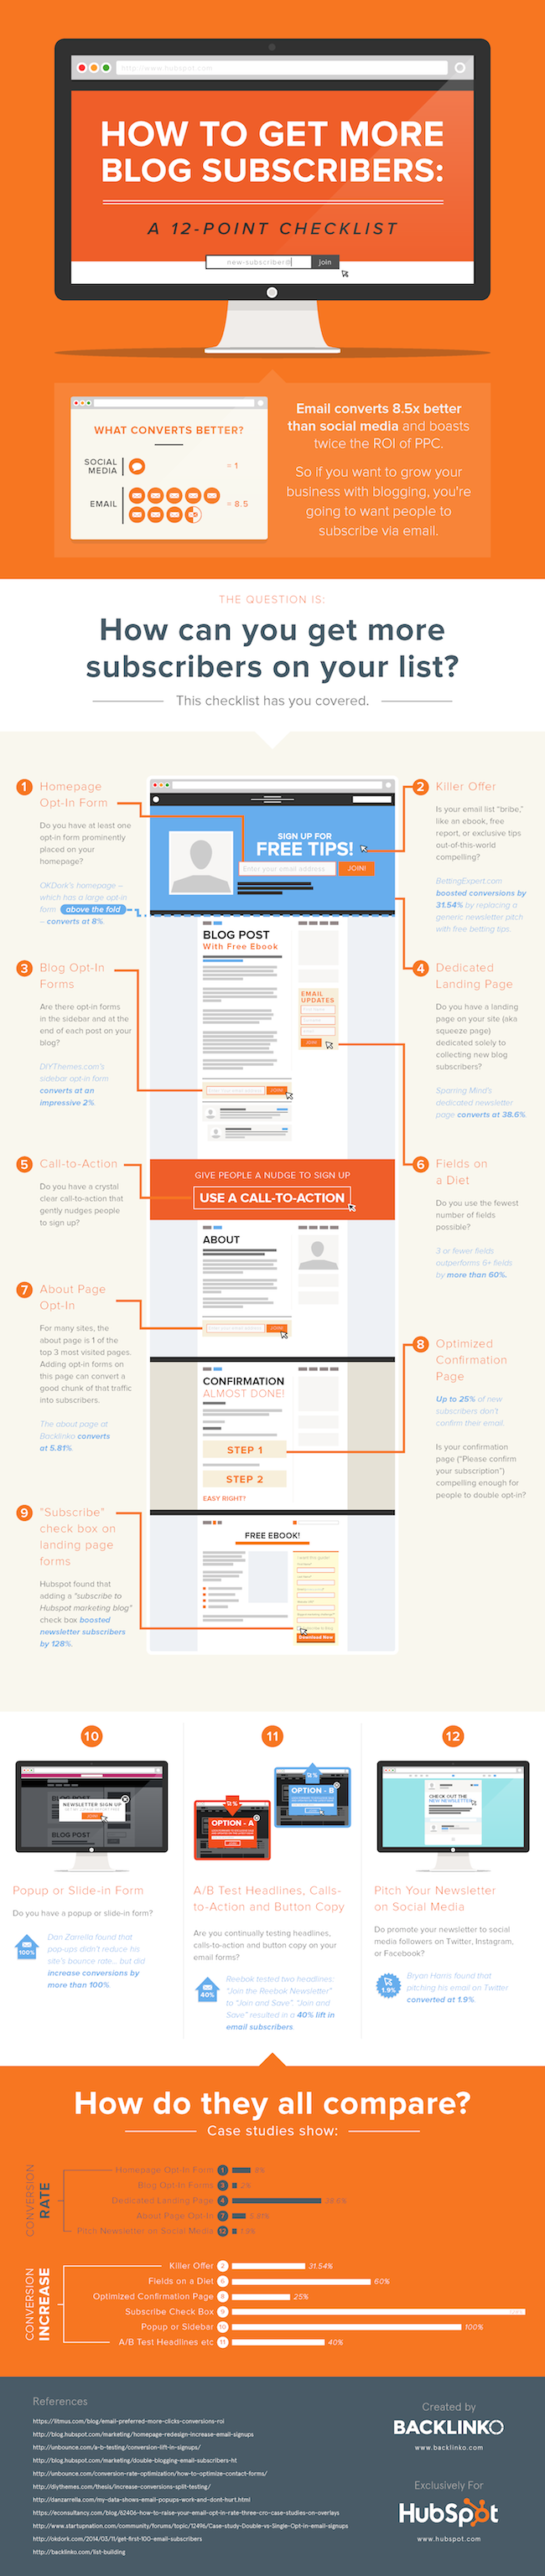 How_To_Get_More_Blog_Subscribers_Infographic_-_small